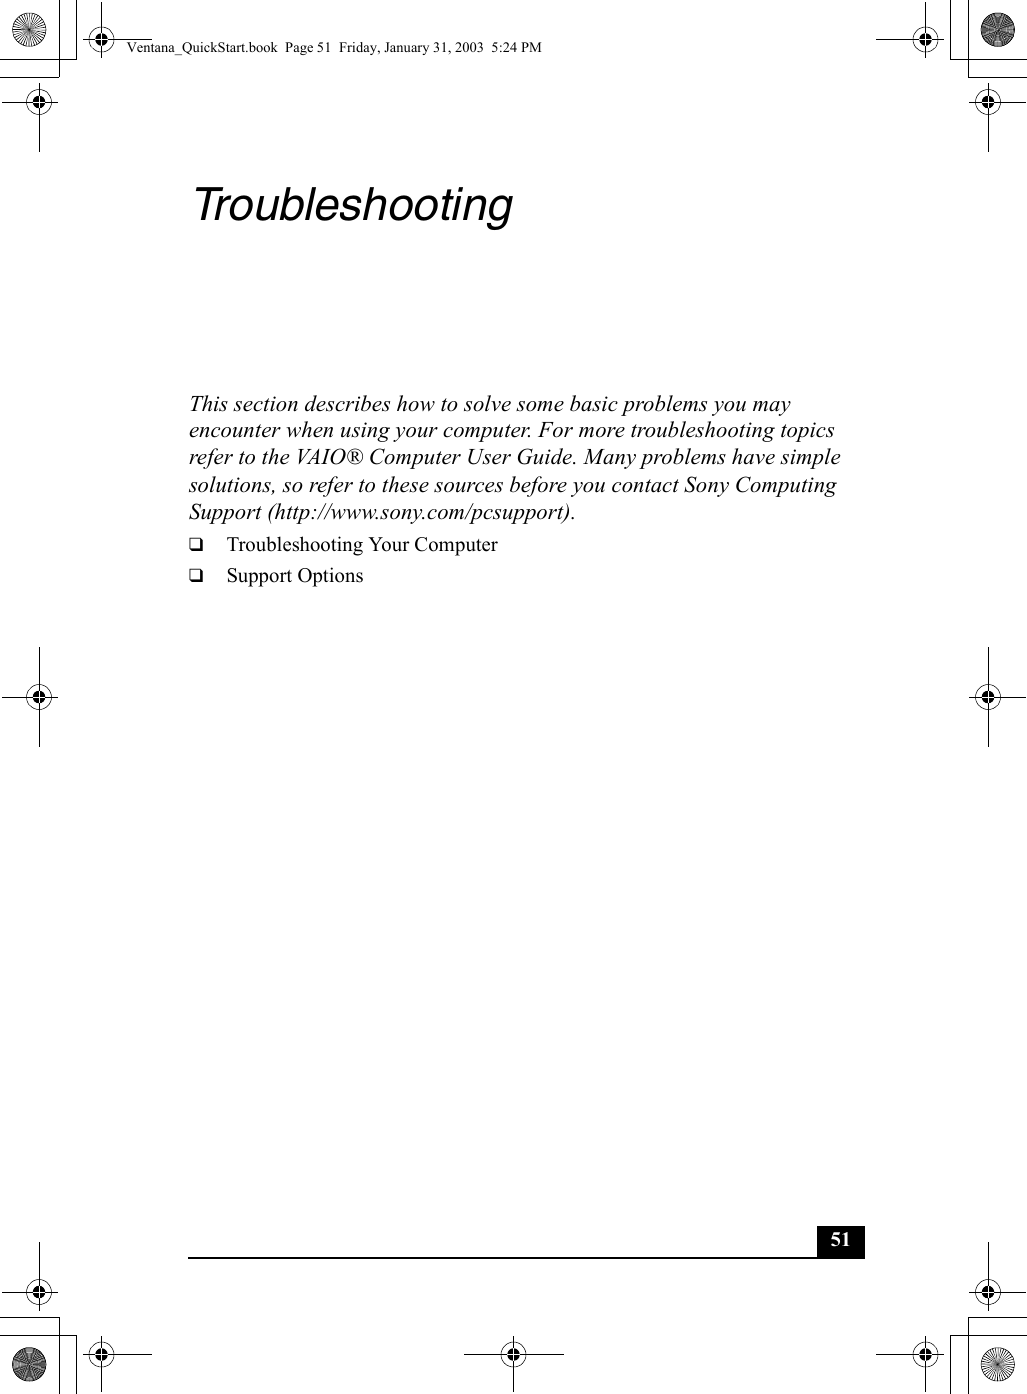 51TroubleshootingThis section describes how to solve some basic problems you may encounter when using your computer. For more troubleshooting topics refer to the VAIO® Computer User Guide. Many problems have simple solutions, so refer to these sources before you contact Sony Computing Support (http://www.sony.com/pcsupport).❑Troubleshooting Your Computer❑Support OptionsVentana_QuickStart.book  Page 51  Friday, January 31, 2003  5:24 PM